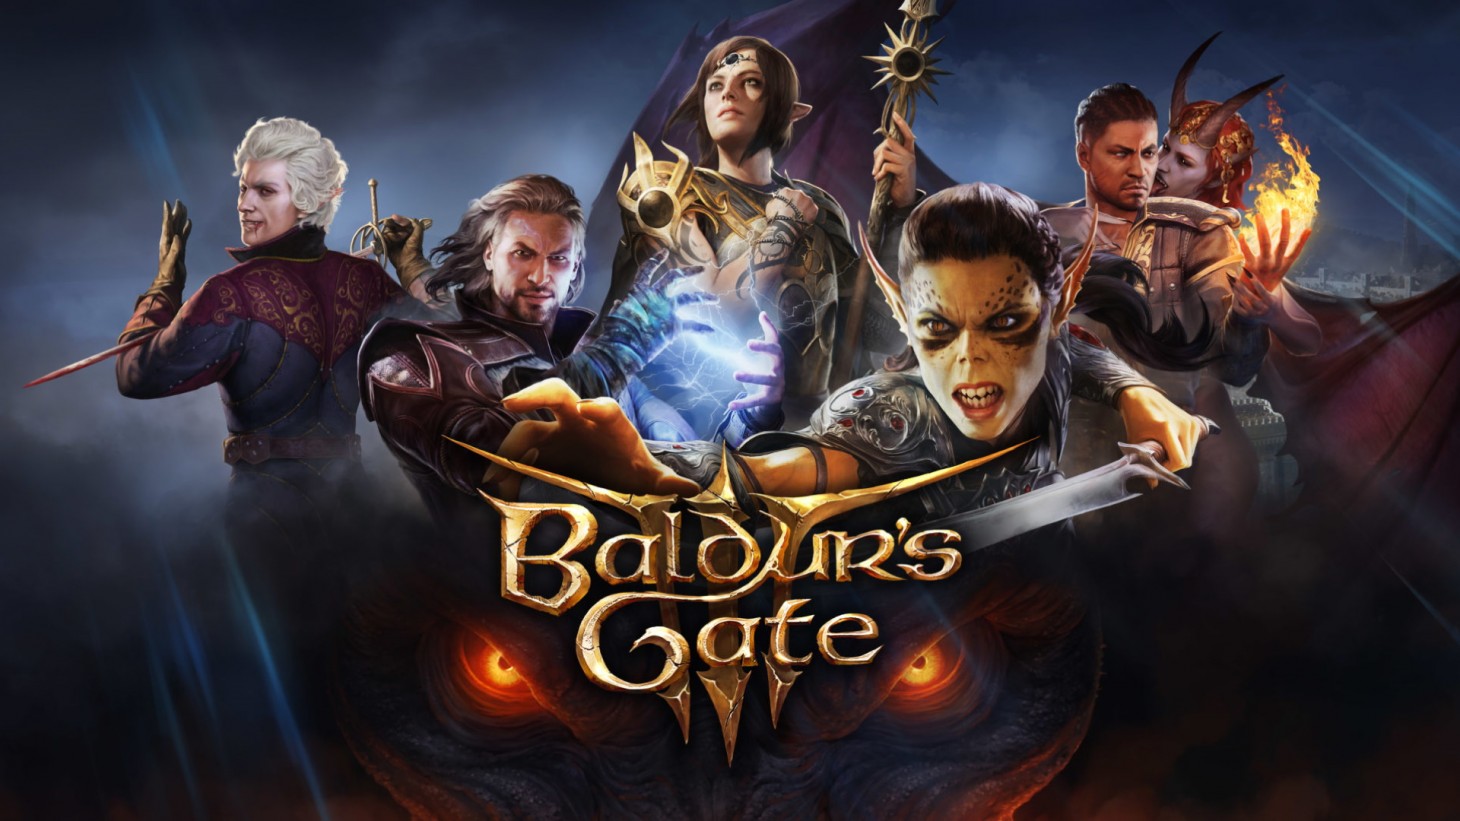 With fantastic characters, a great combat system, and an impressive co-op mode, Baldur’s Gate 3 is a vast, dense RPG.